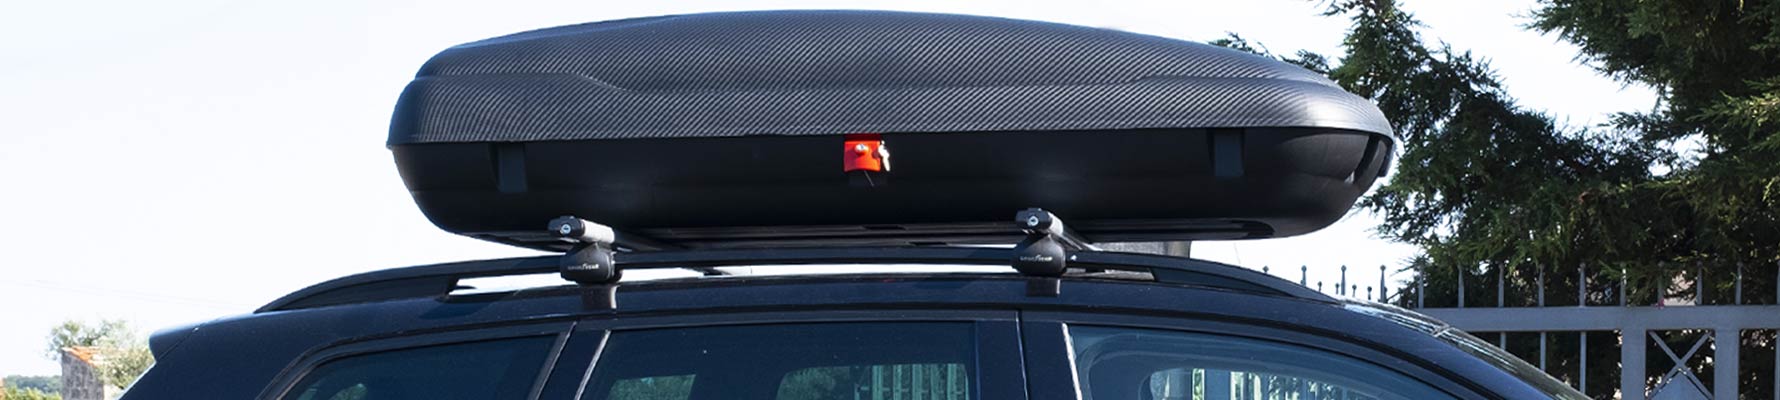 Online Purchase of Travel Car Accessories, Quality Roof Box